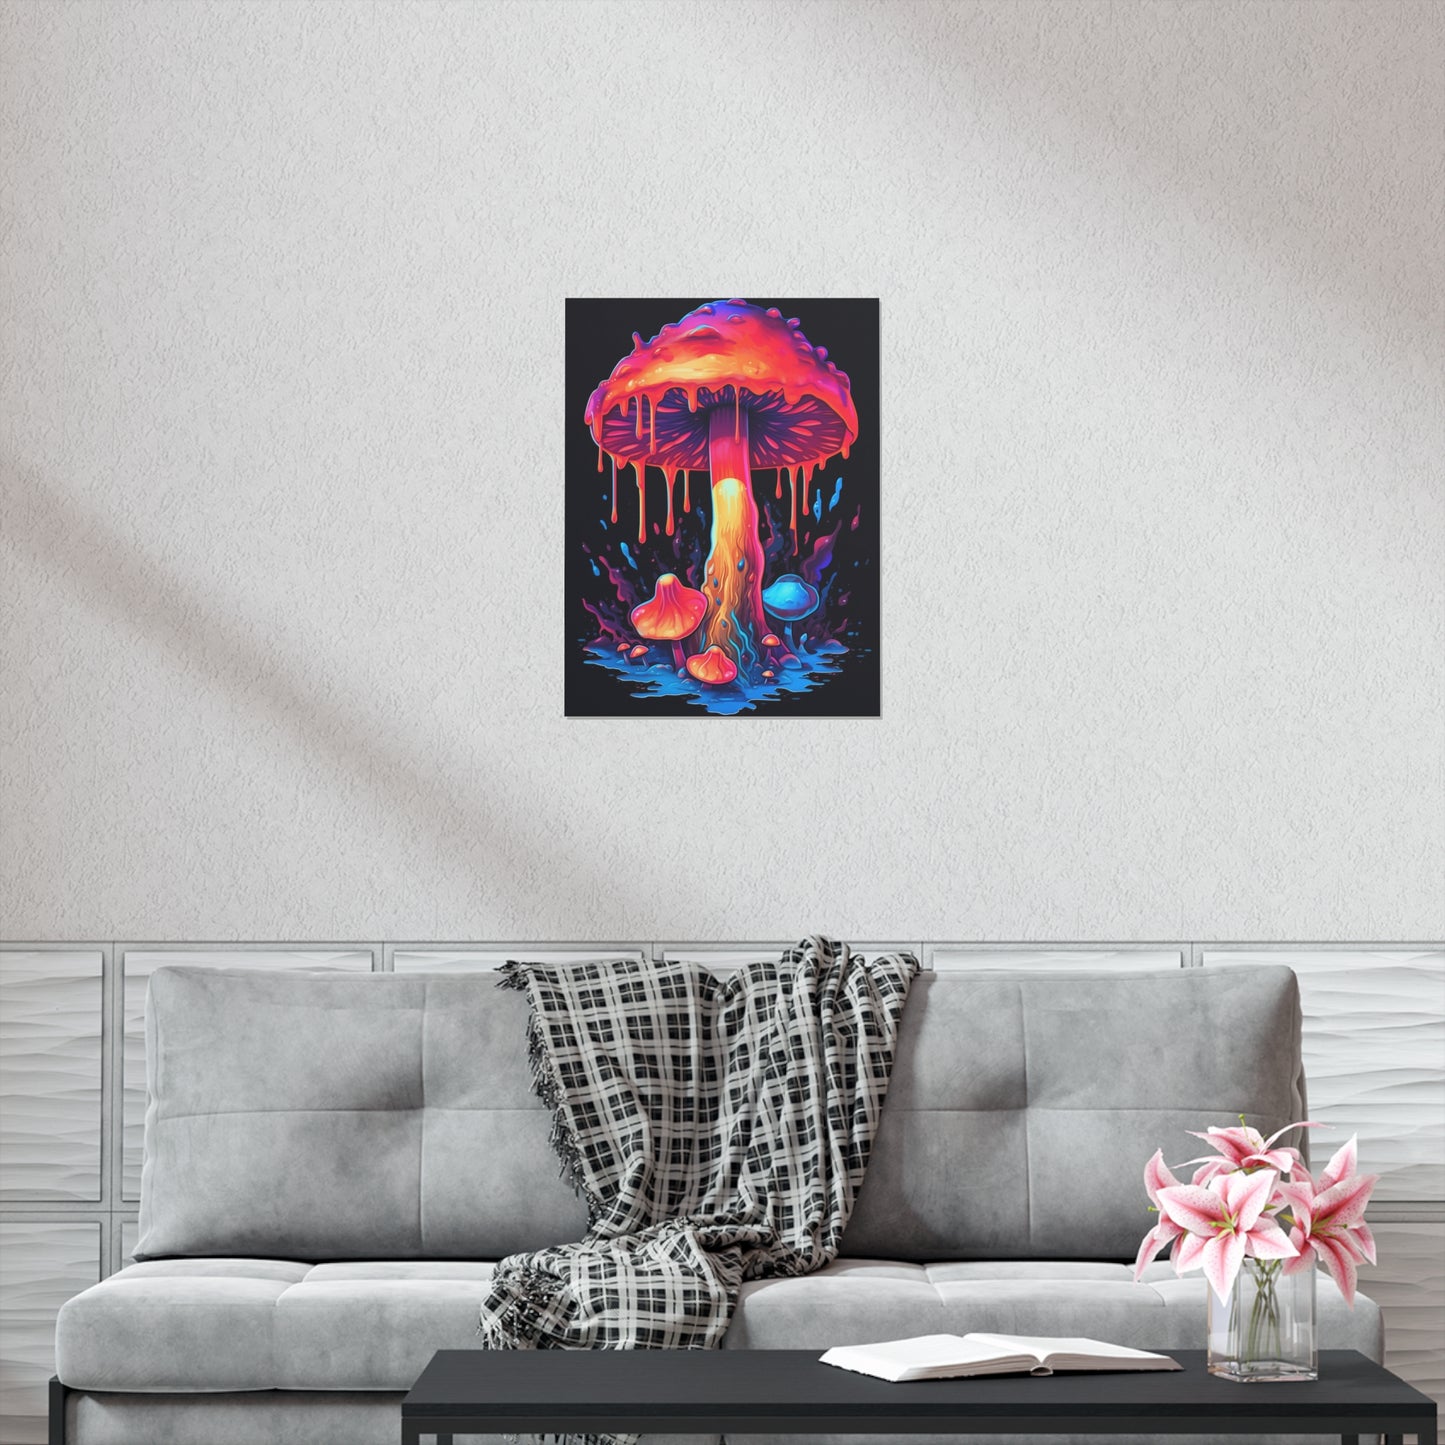 Trippy Dripping Mushroom Poster Print, Wall Image Art Vertical Cool Paper Artwork Small Large Room Office Decor Starcove Fashion